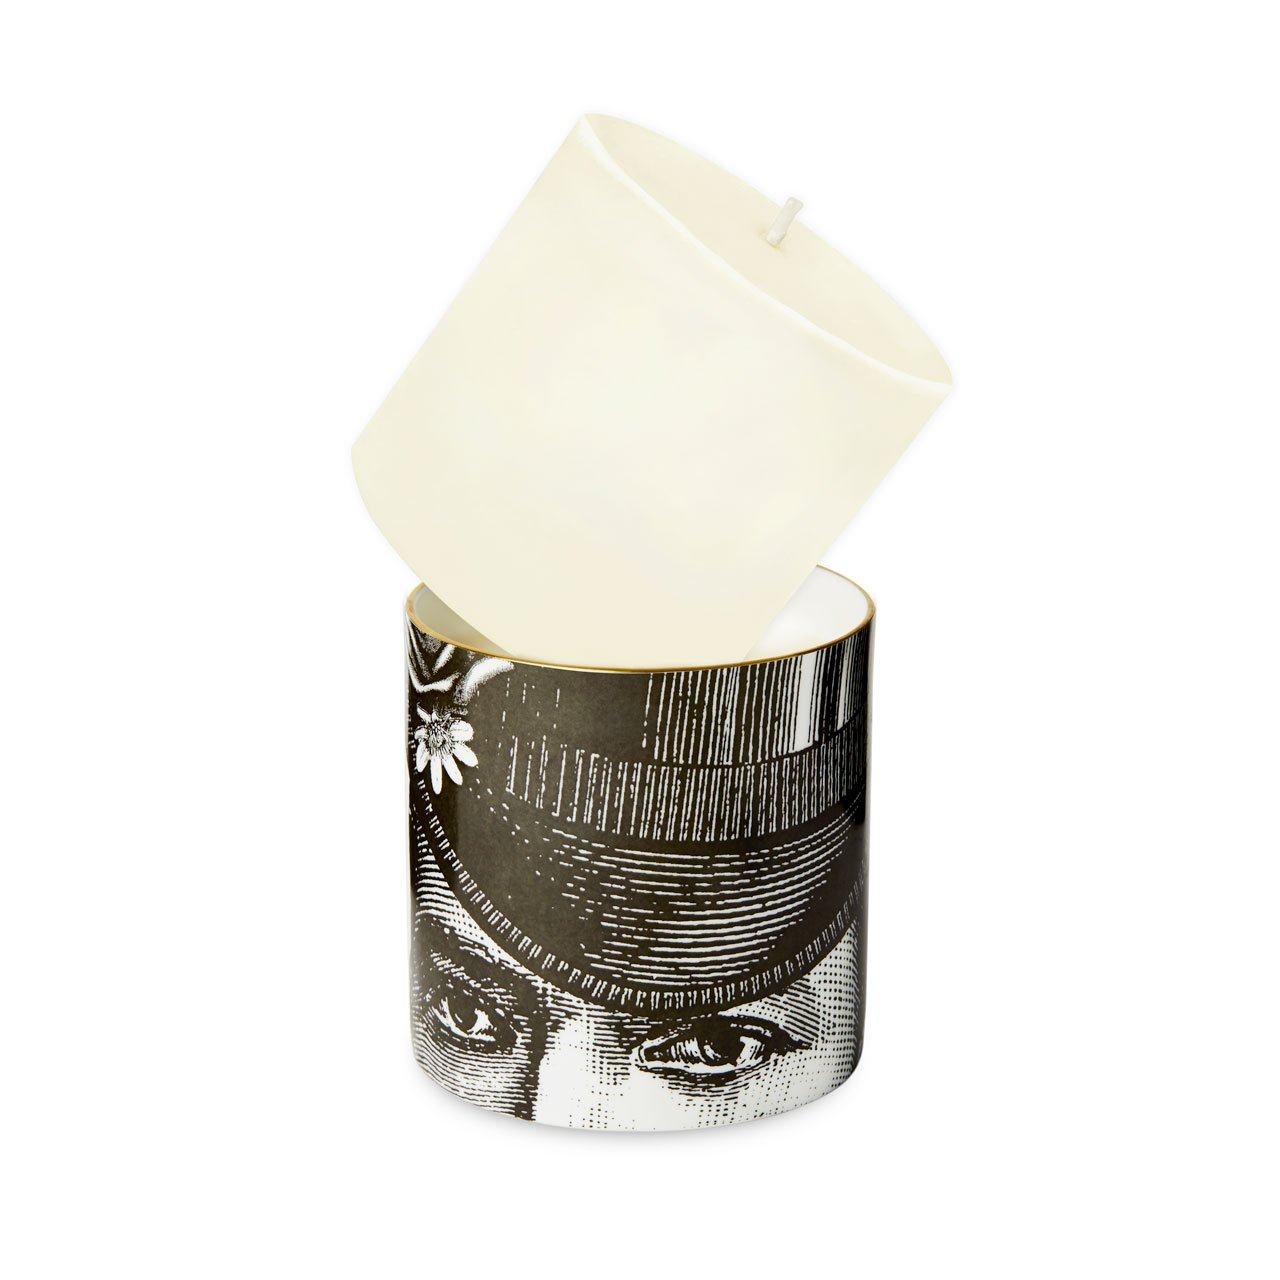 Refill for The Dashing Gent Ceramic Candle